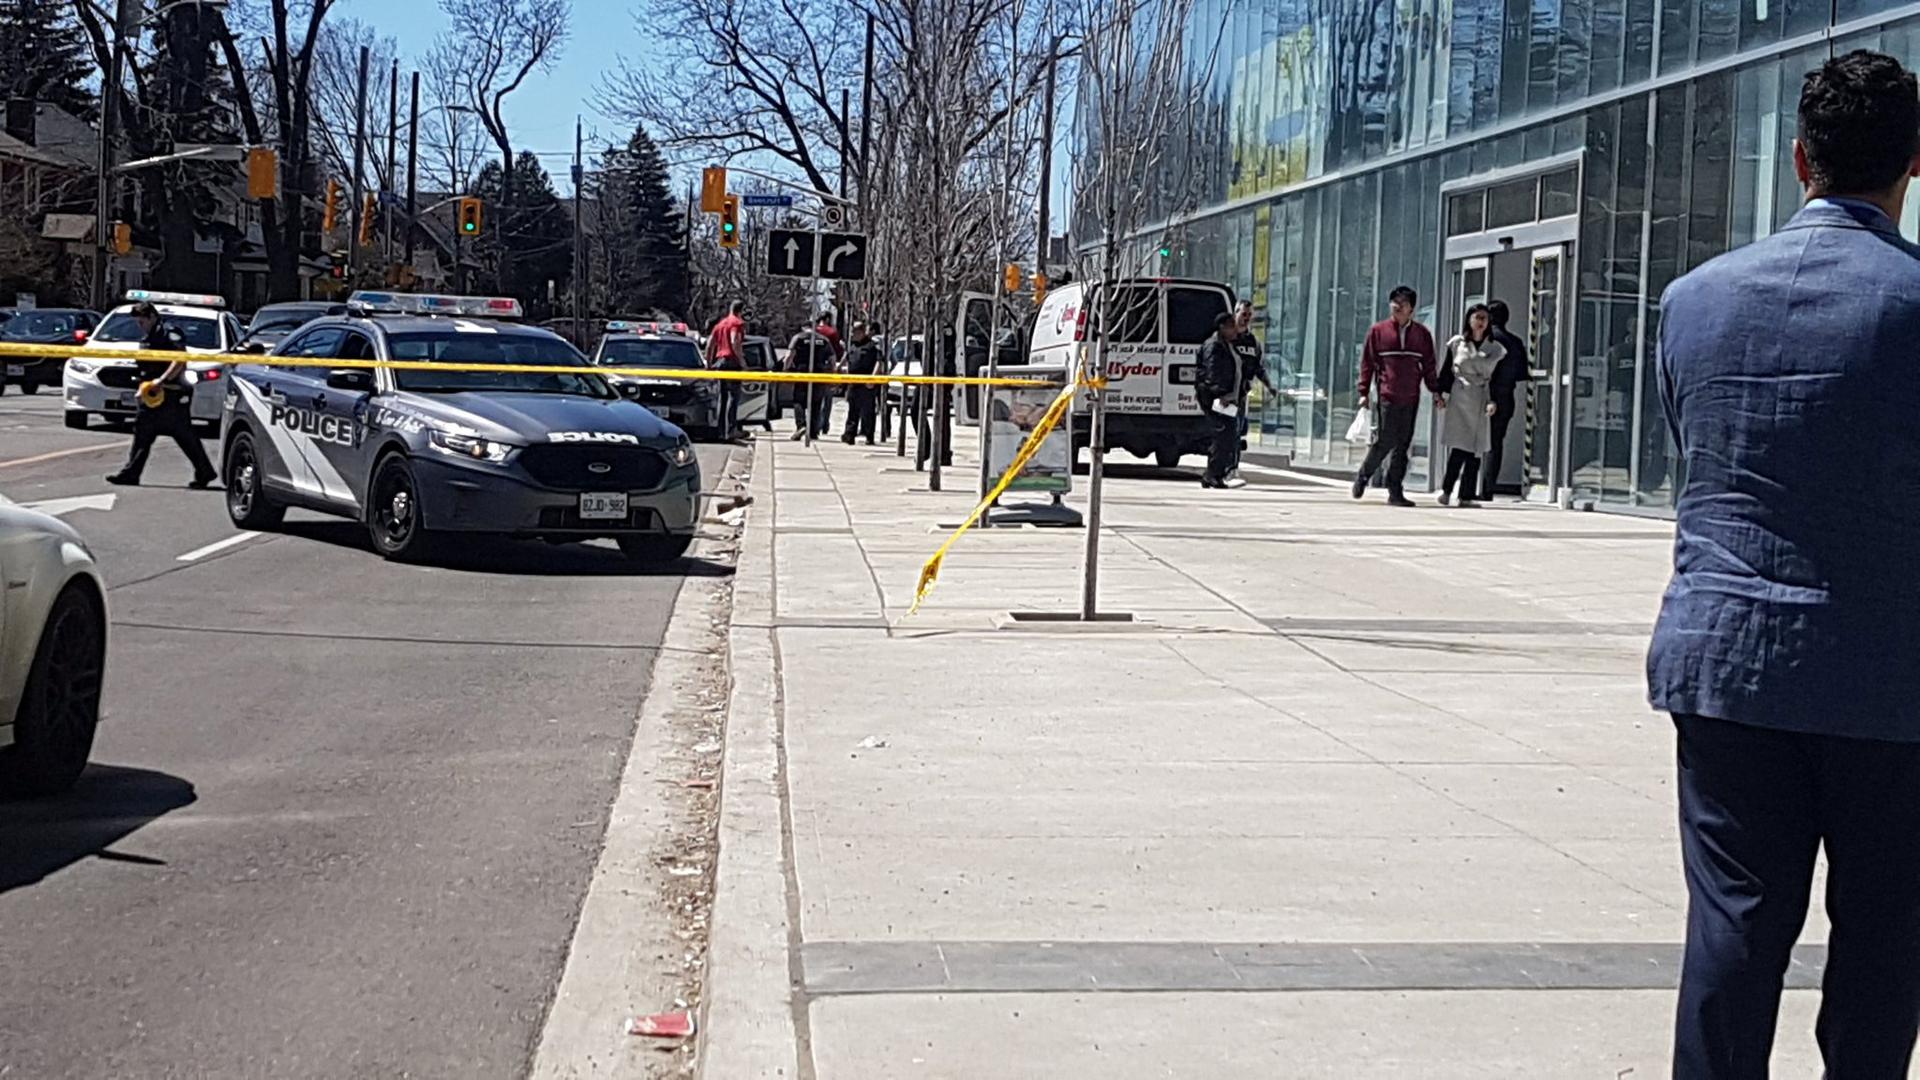 Police officers arrest suspect driver after a van hit multiple people at a major intersection in Toronto, Canada April 23, 2018, in this picture obtained from social media.